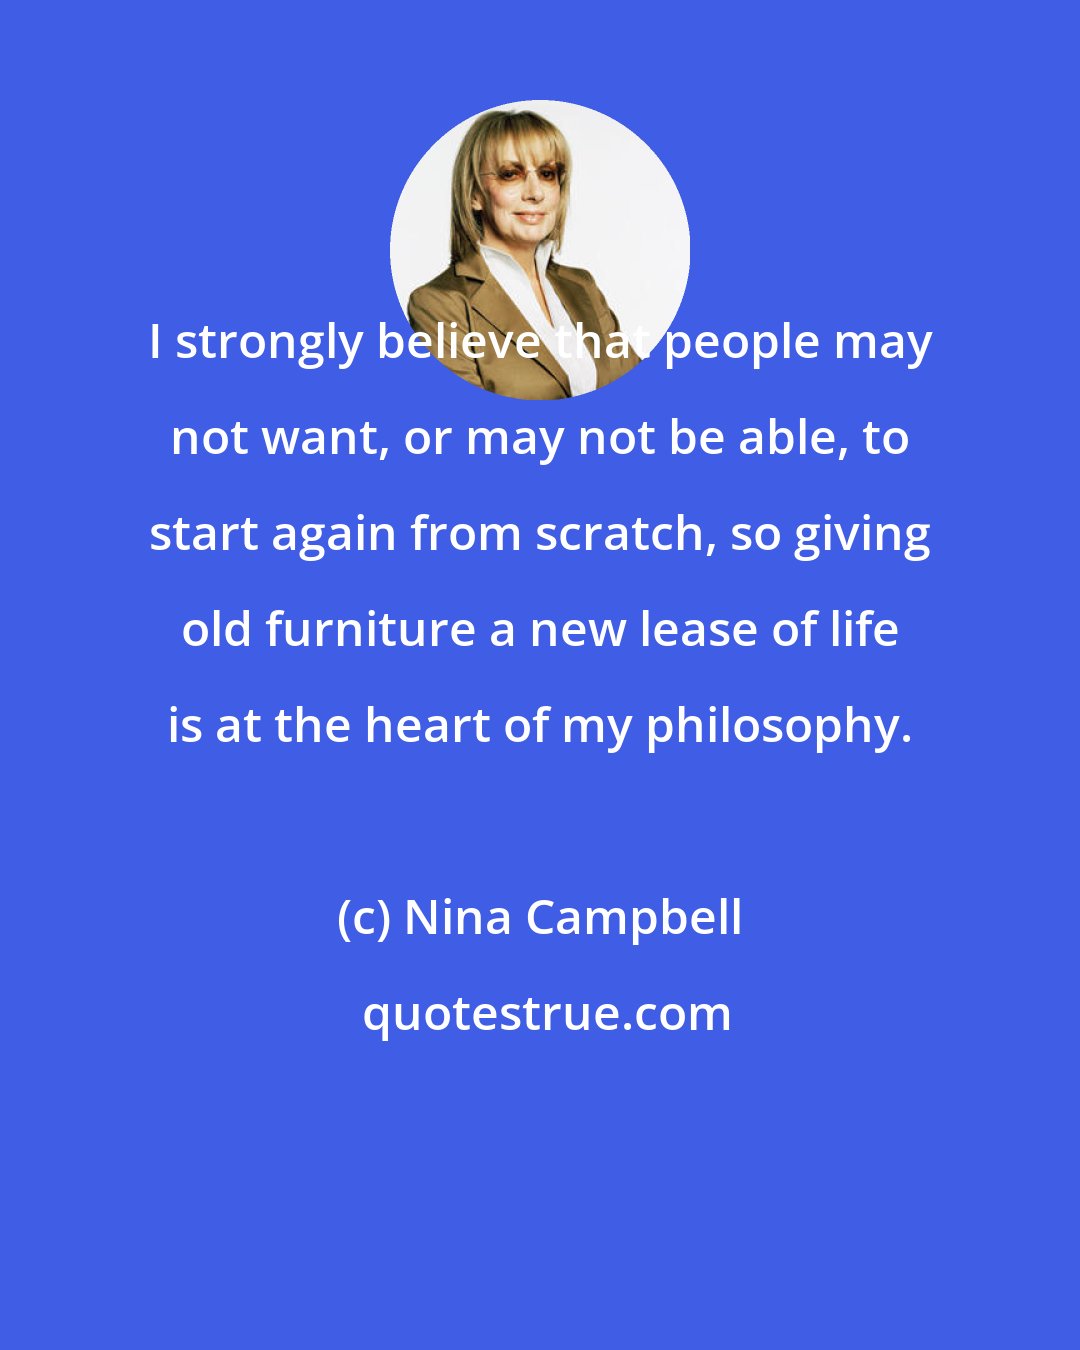 Nina Campbell: I strongly believe that people may not want, or may not be able, to start again from scratch, so giving old furniture a new lease of life is at the heart of my philosophy.